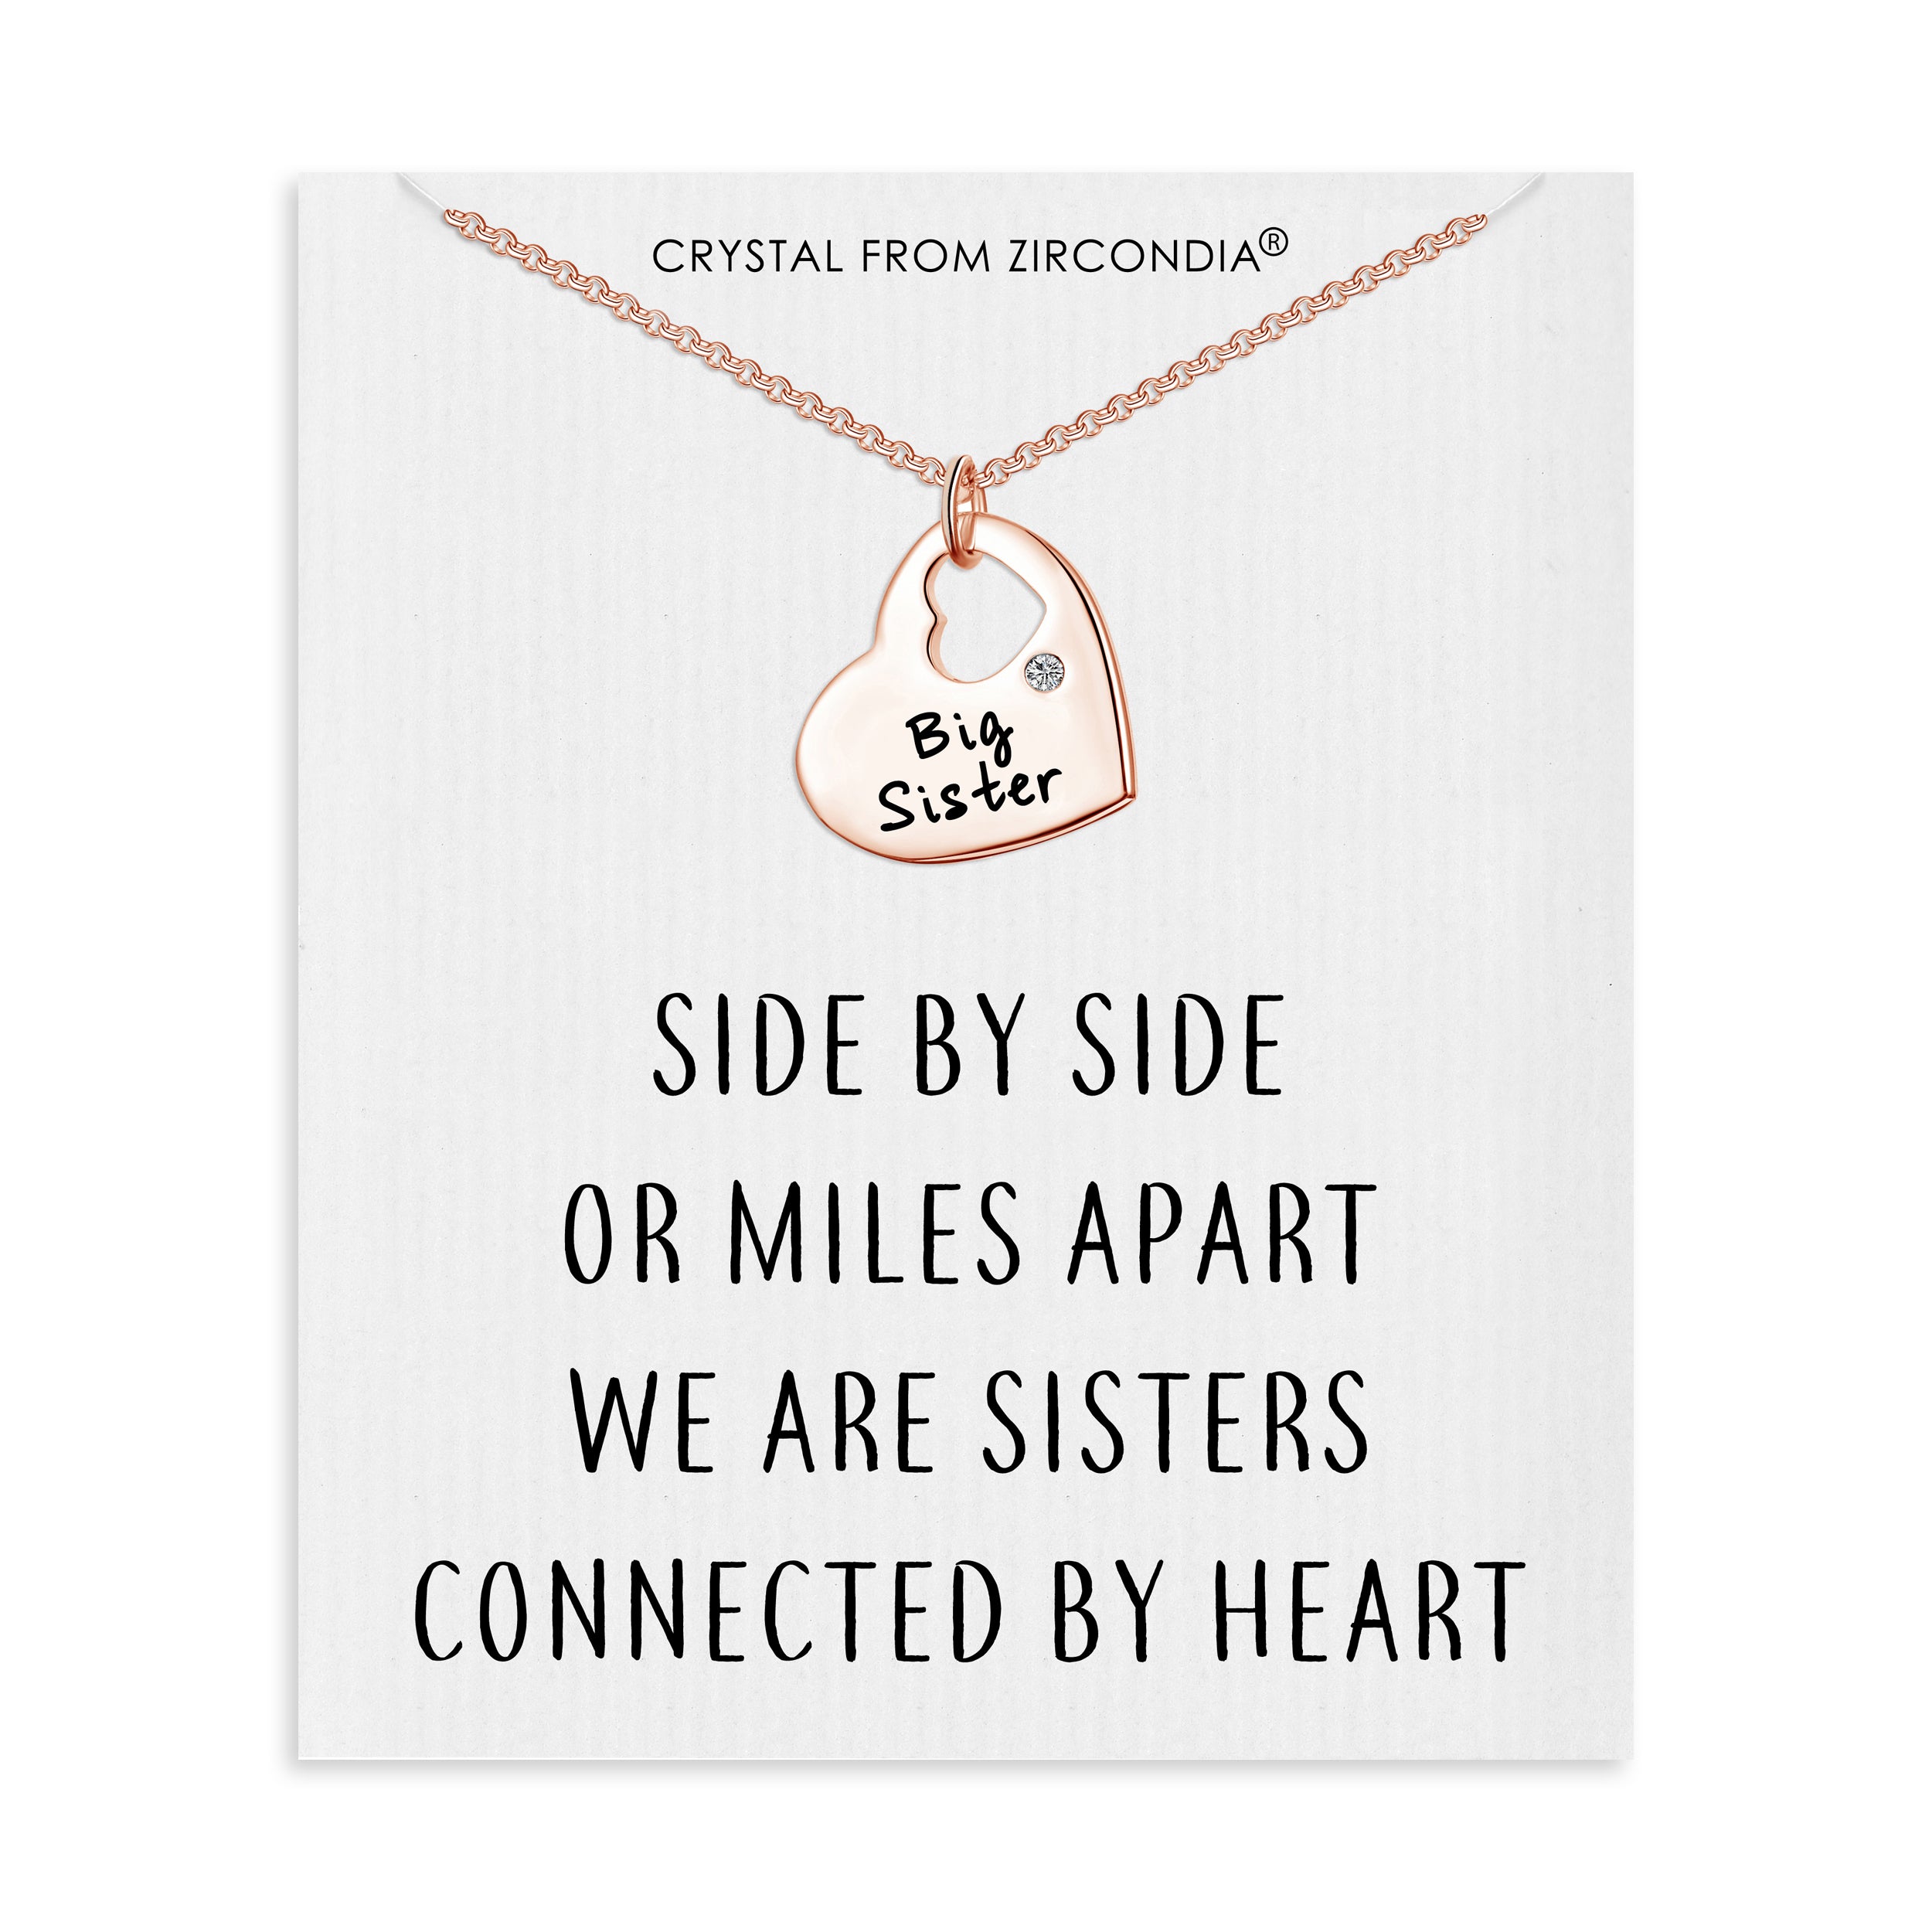 Rose Gold Plated Big Sister Heart Necklace with Quote Card Created with Zircondia® Crystals by Philip Jones Jewellery